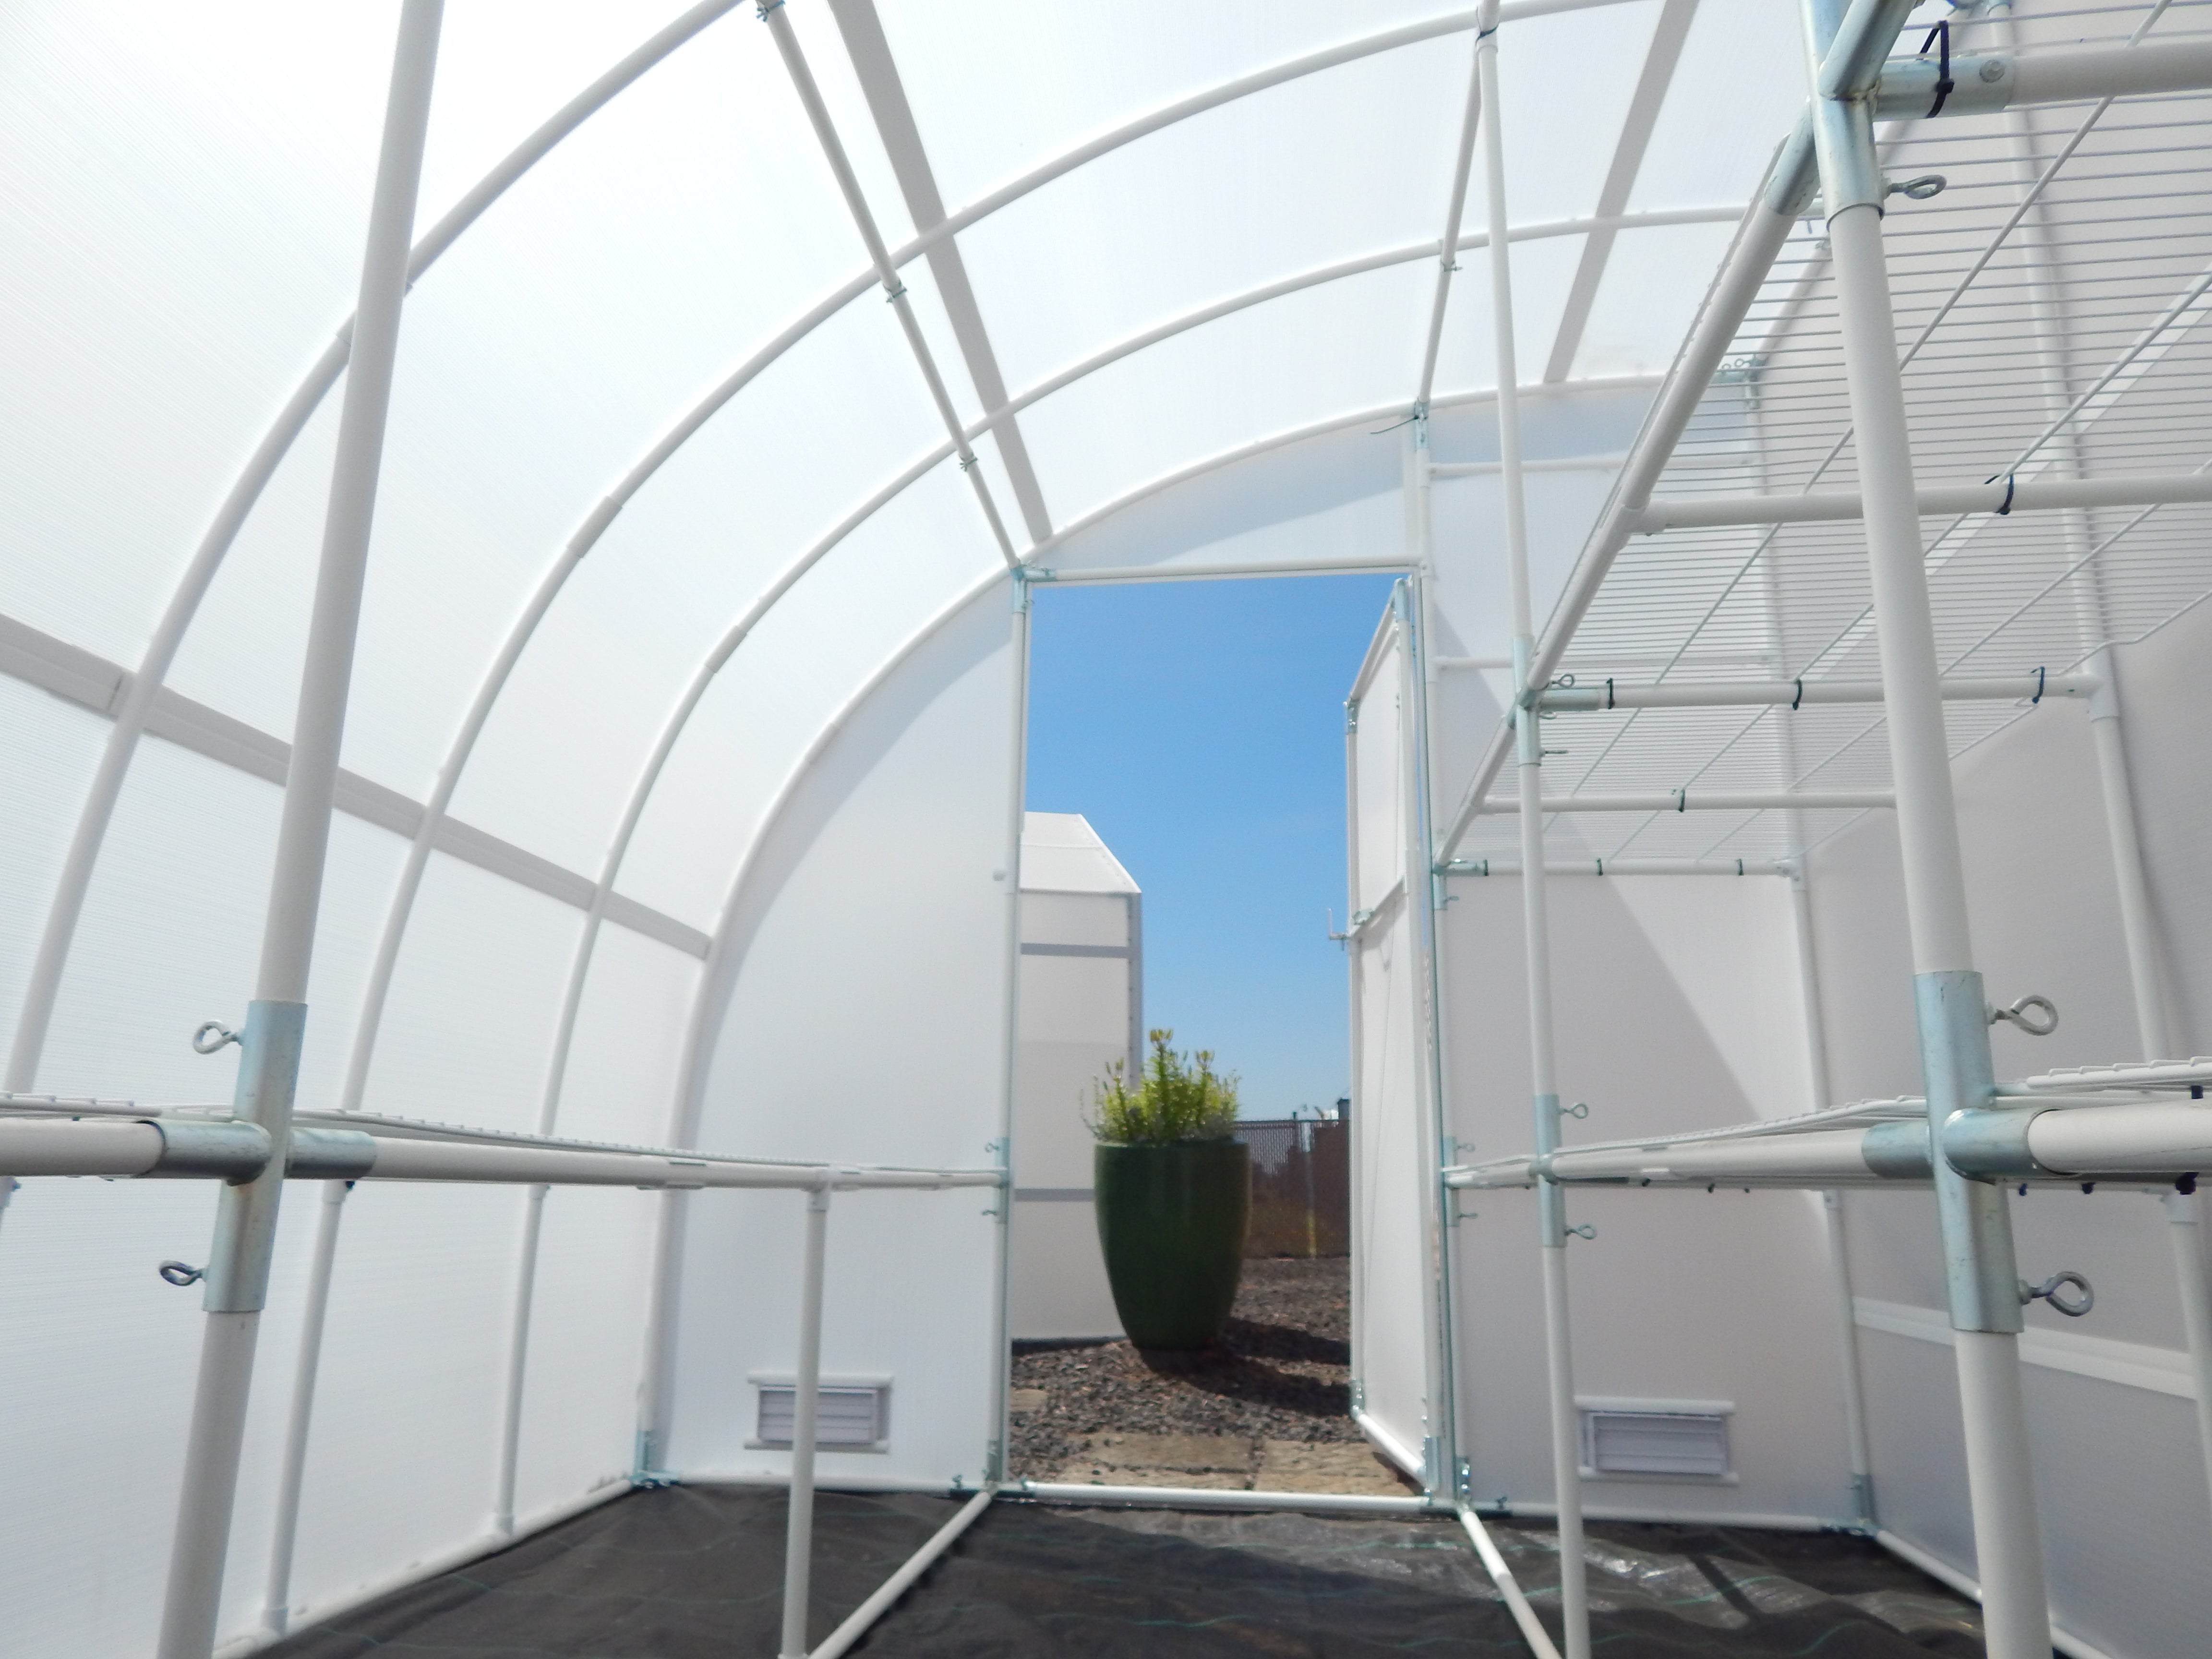 Harvester™  8x8x16.ft Lean-to Greenhouse - Dive To Garden